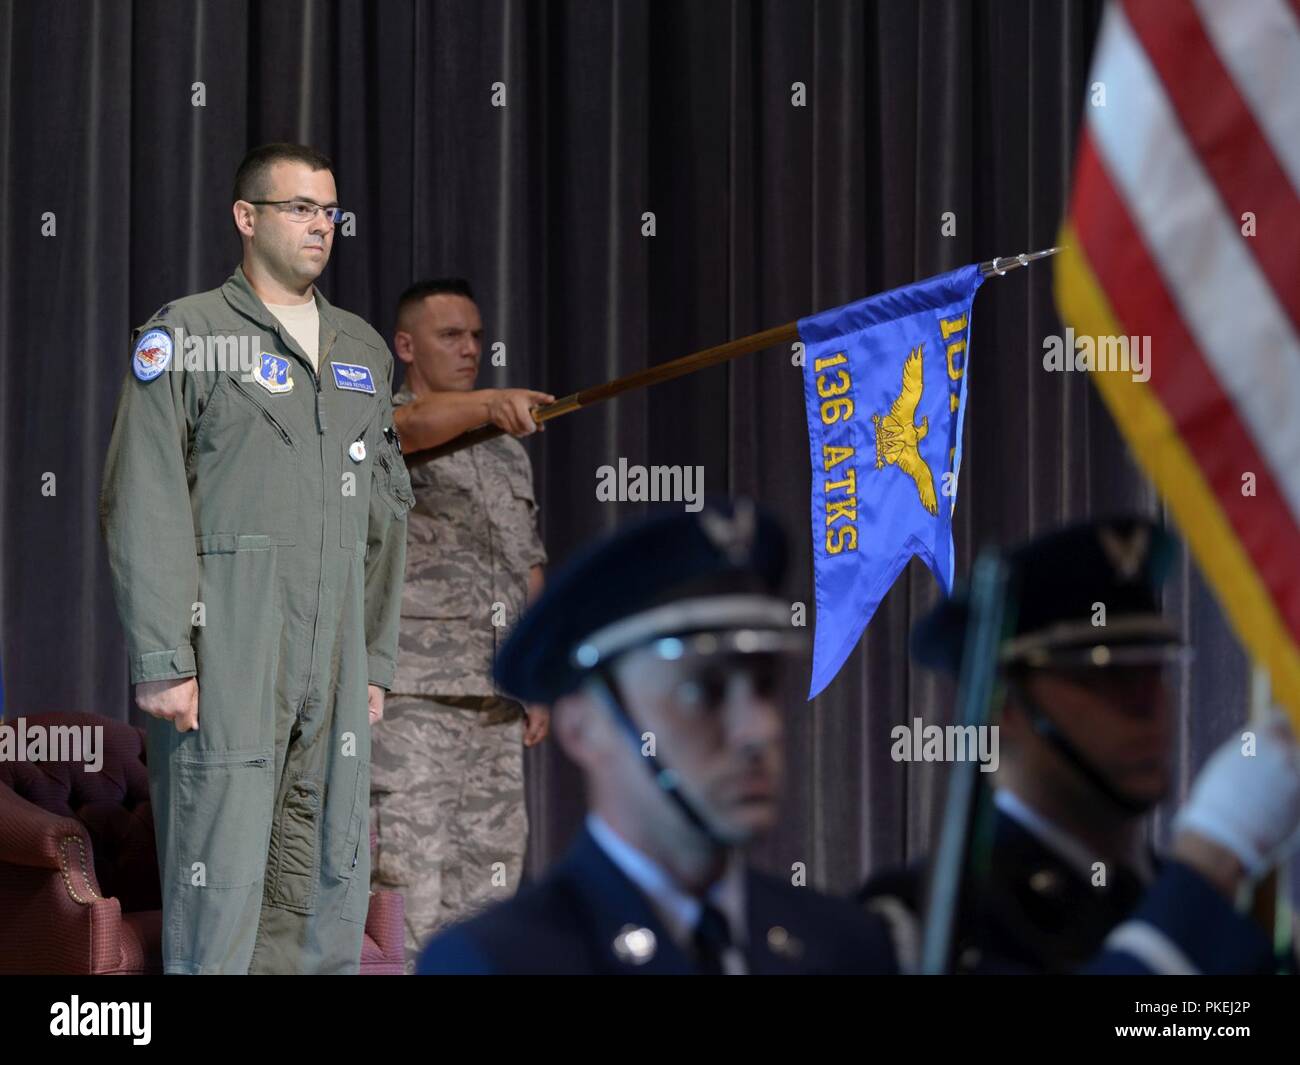 Lt. Col. Shawn Reynolds, commander of the 136th Attack Squadron, 107th Attack Wing, New York National Guard, prepares to take command of the squadron during a ceremony at Niagara Falls Air Reserve Station, N.Y., Aug, 11, 2018. The outgoing commander, Lt. Col. Michael Galvin, relinquishes command as he retires. Stock Photo